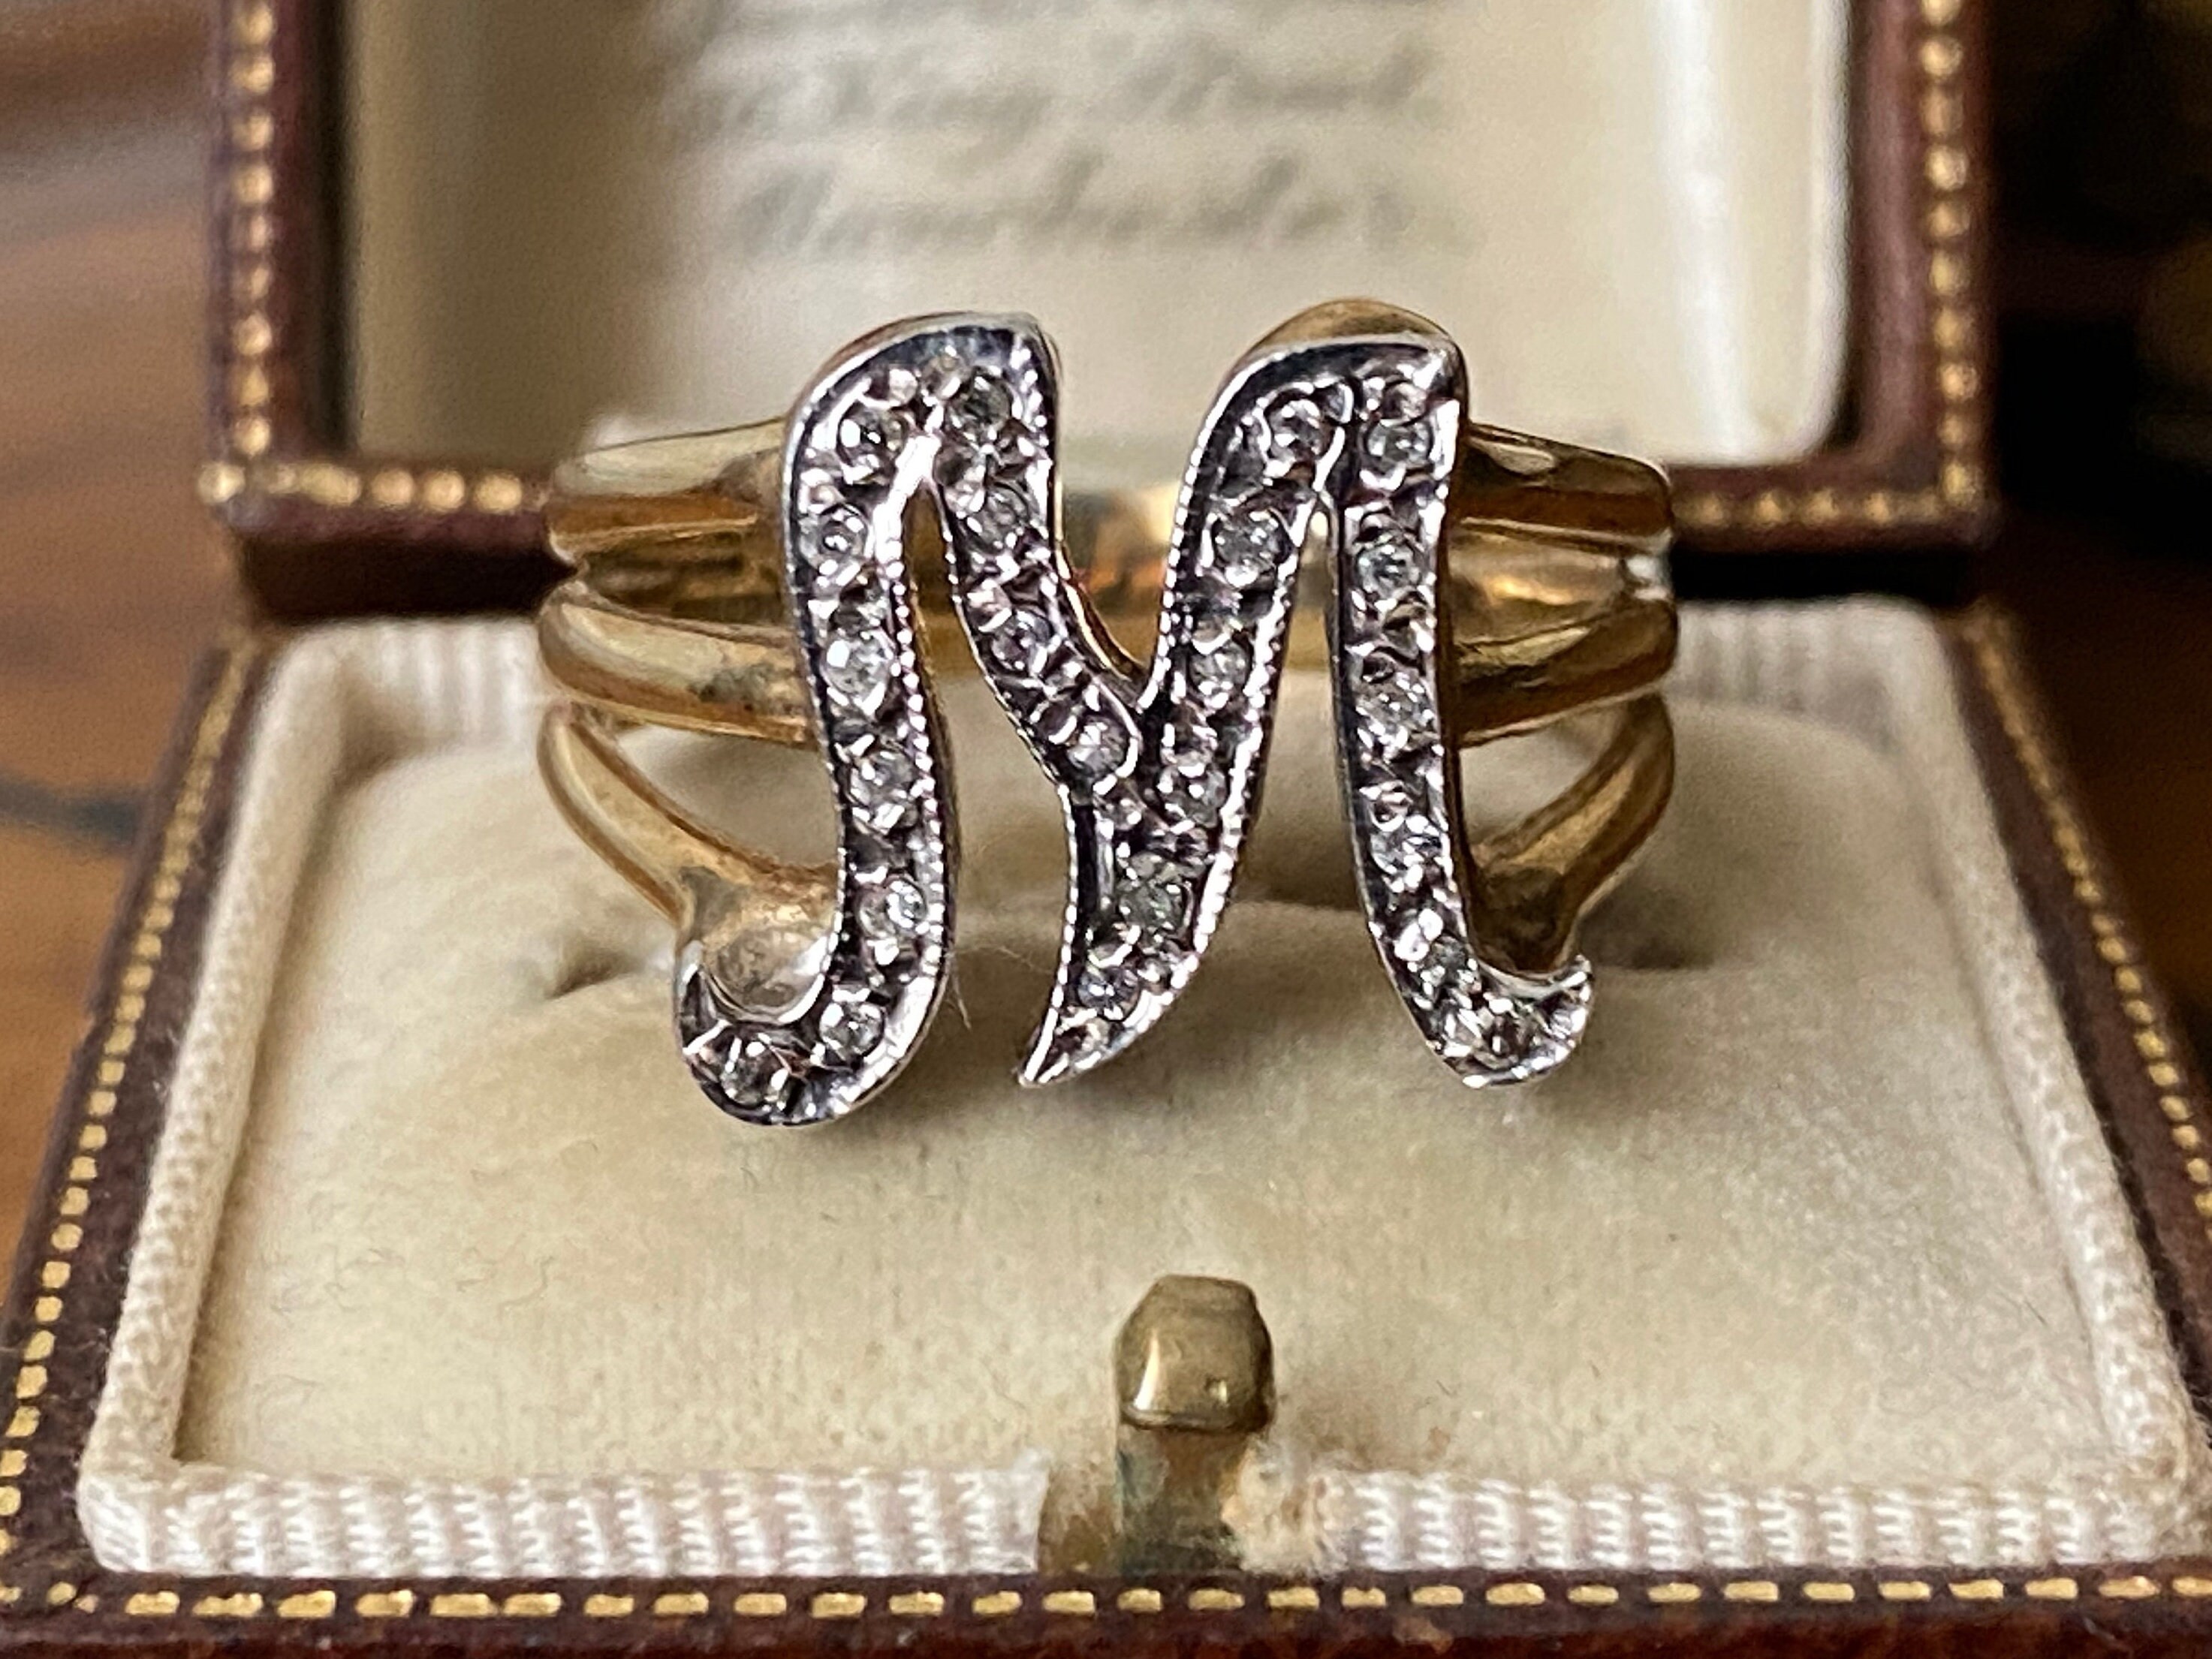 M letter ring | Gold rings fashion, Gold ring designs, Fashion rings